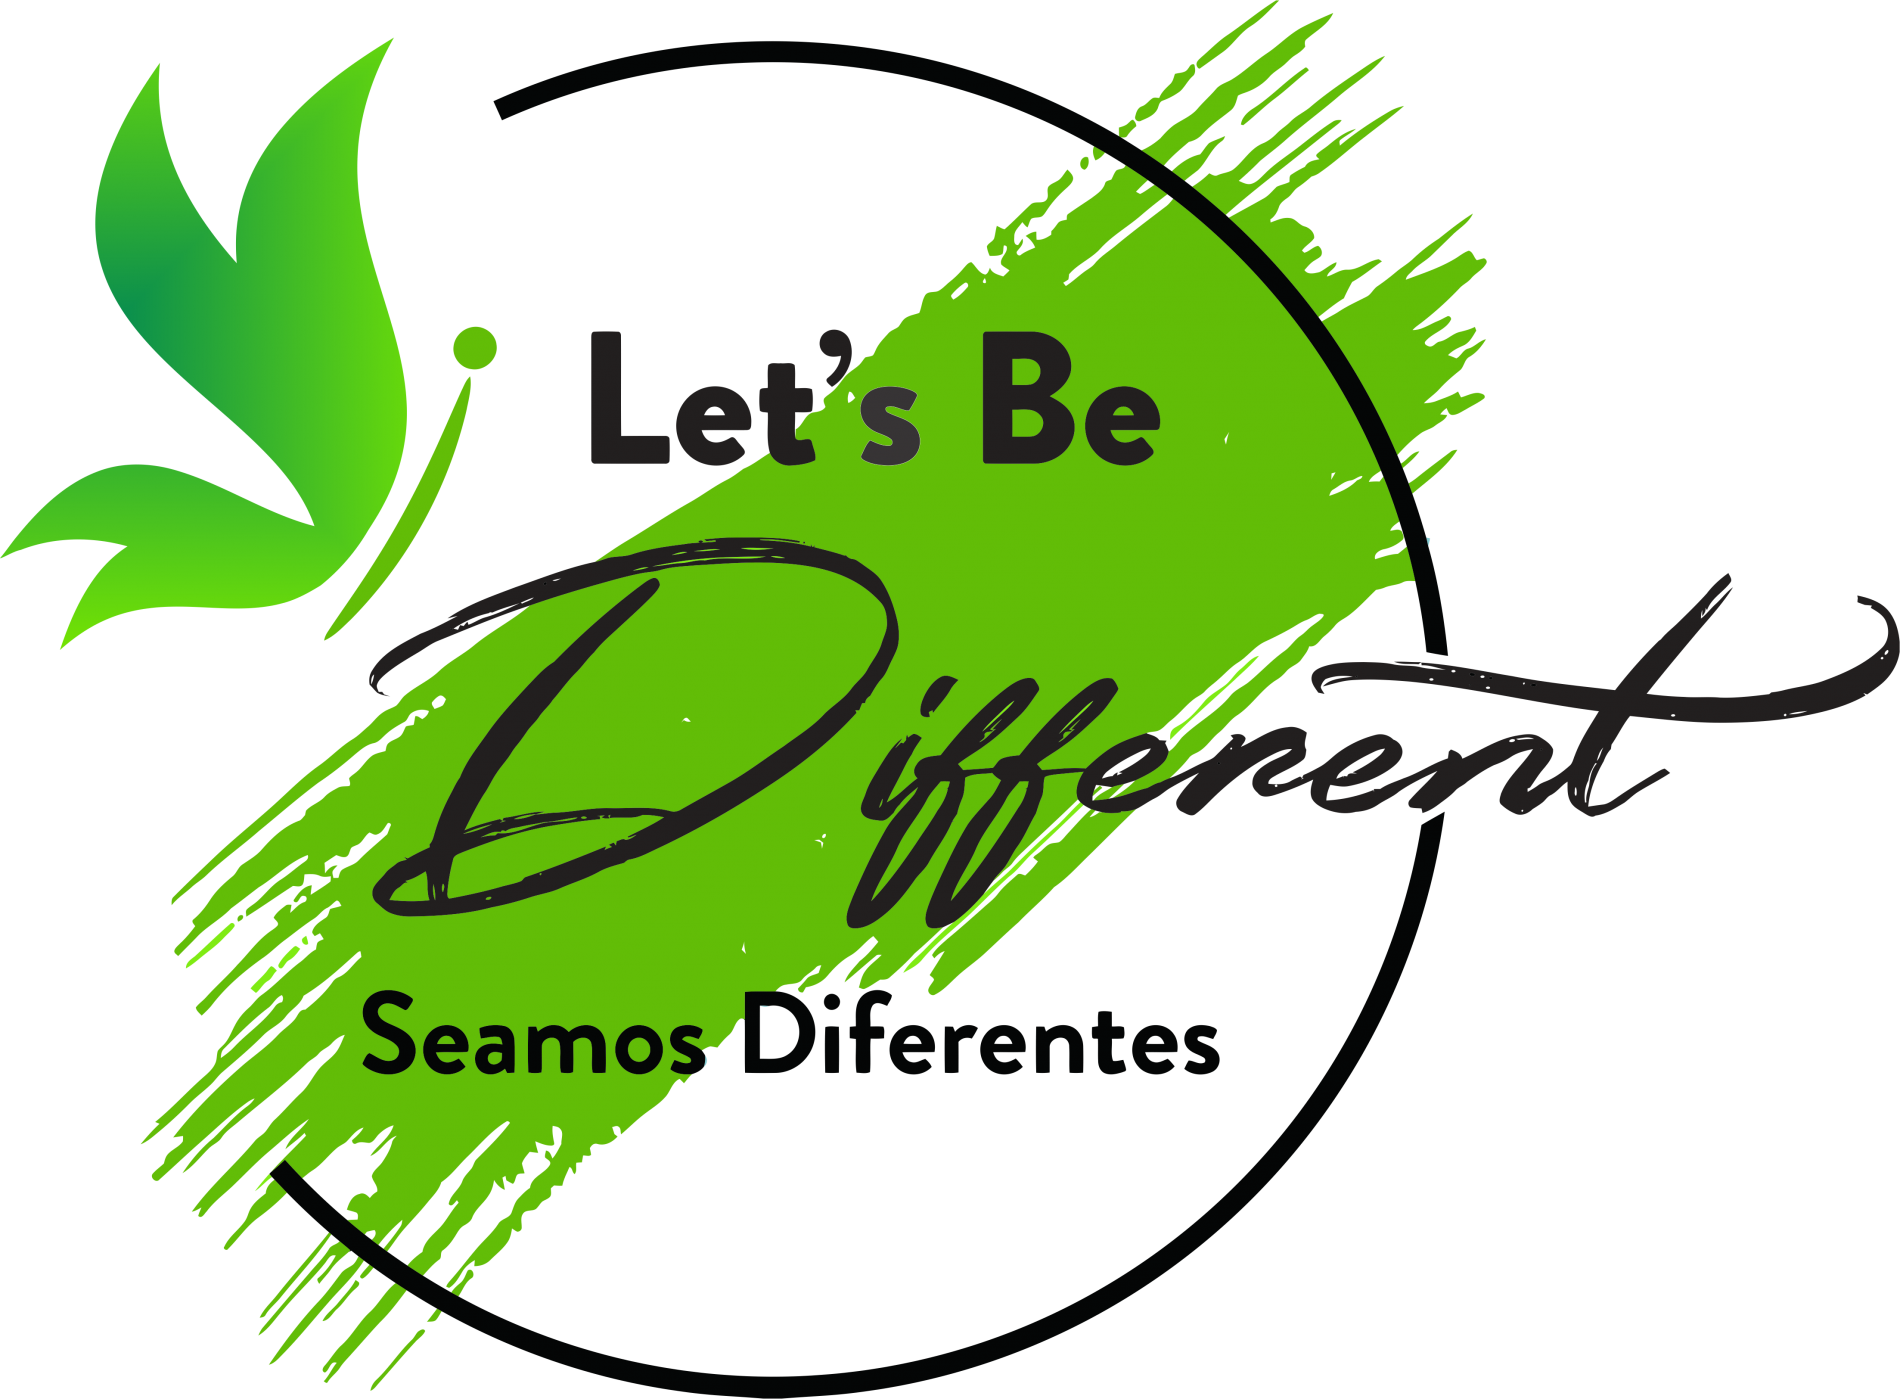 Lets-be-different-logo-2-1-2-e1621042721900.png